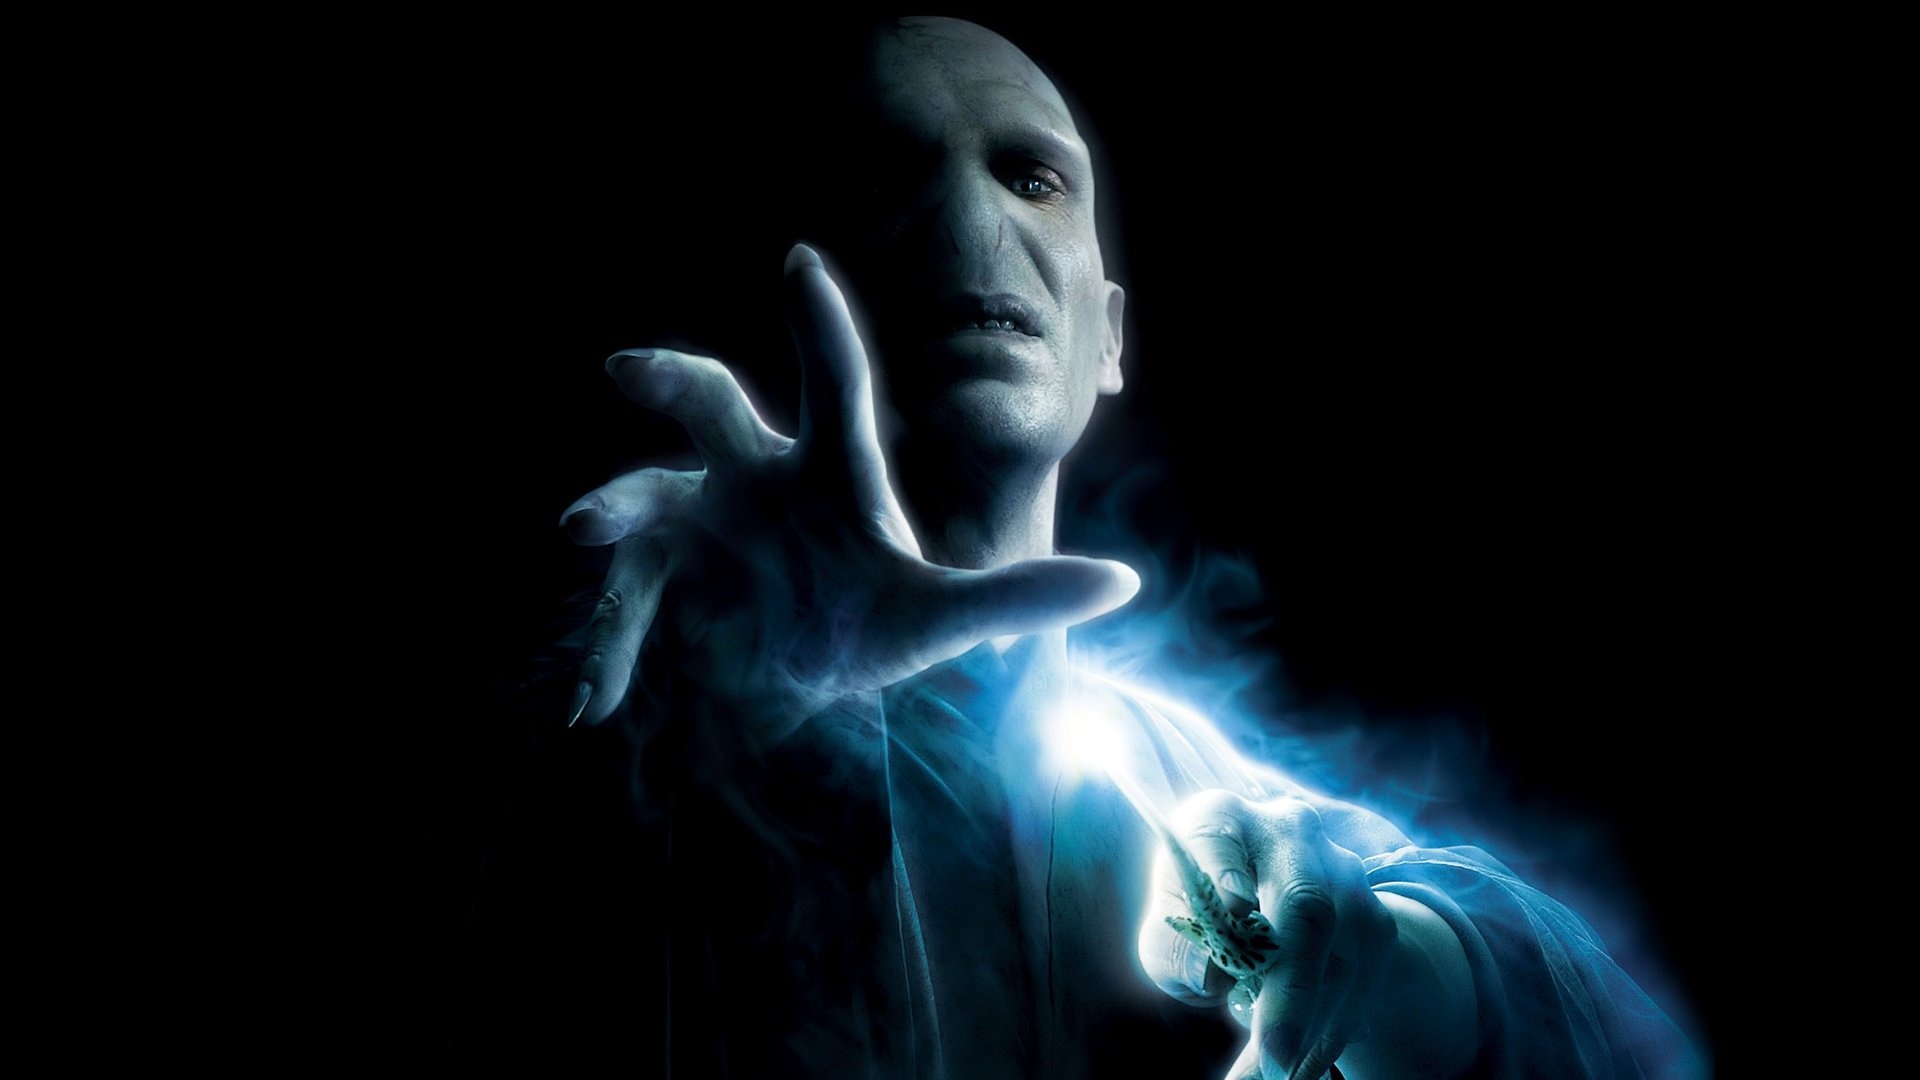 Lord Voldemort, Top free backgrounds, Movie character, 1920x1080 Full HD Desktop